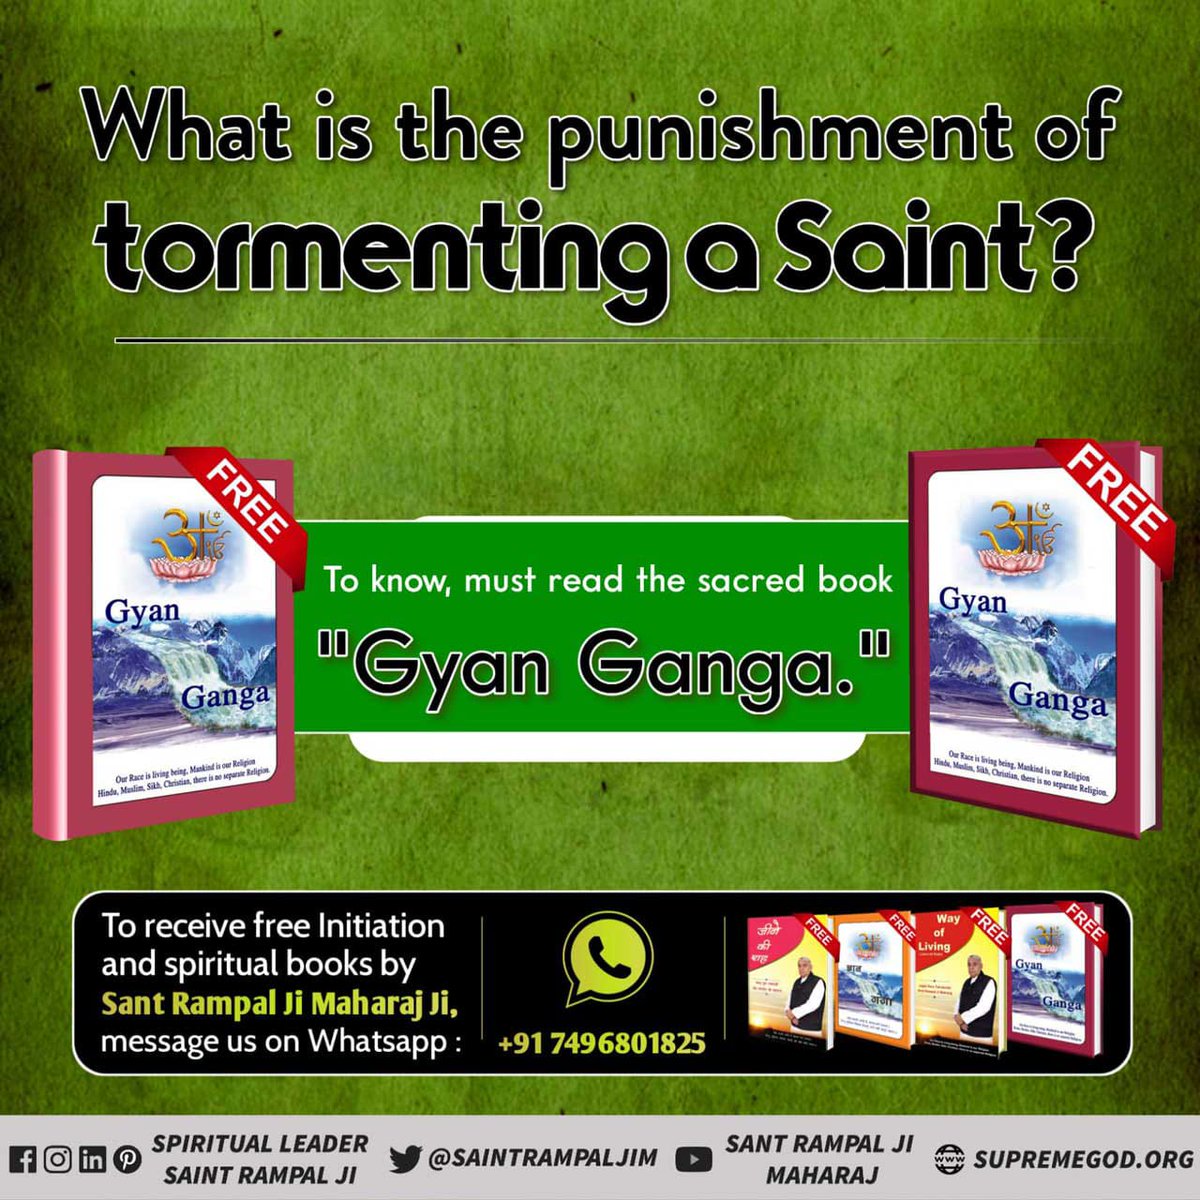 What is the punishment of tormenting a Saint?
#hindiquotes
#SantRampalJiMaharaj
#SaintRampalJiQuotes #SantRampalJiQuotes #SantRampalJiMaharaj
#SaintRampalJi
#KabirisGod                  
#SupremeGod
To know, must read the sacred book 'Gyan Ganga.'